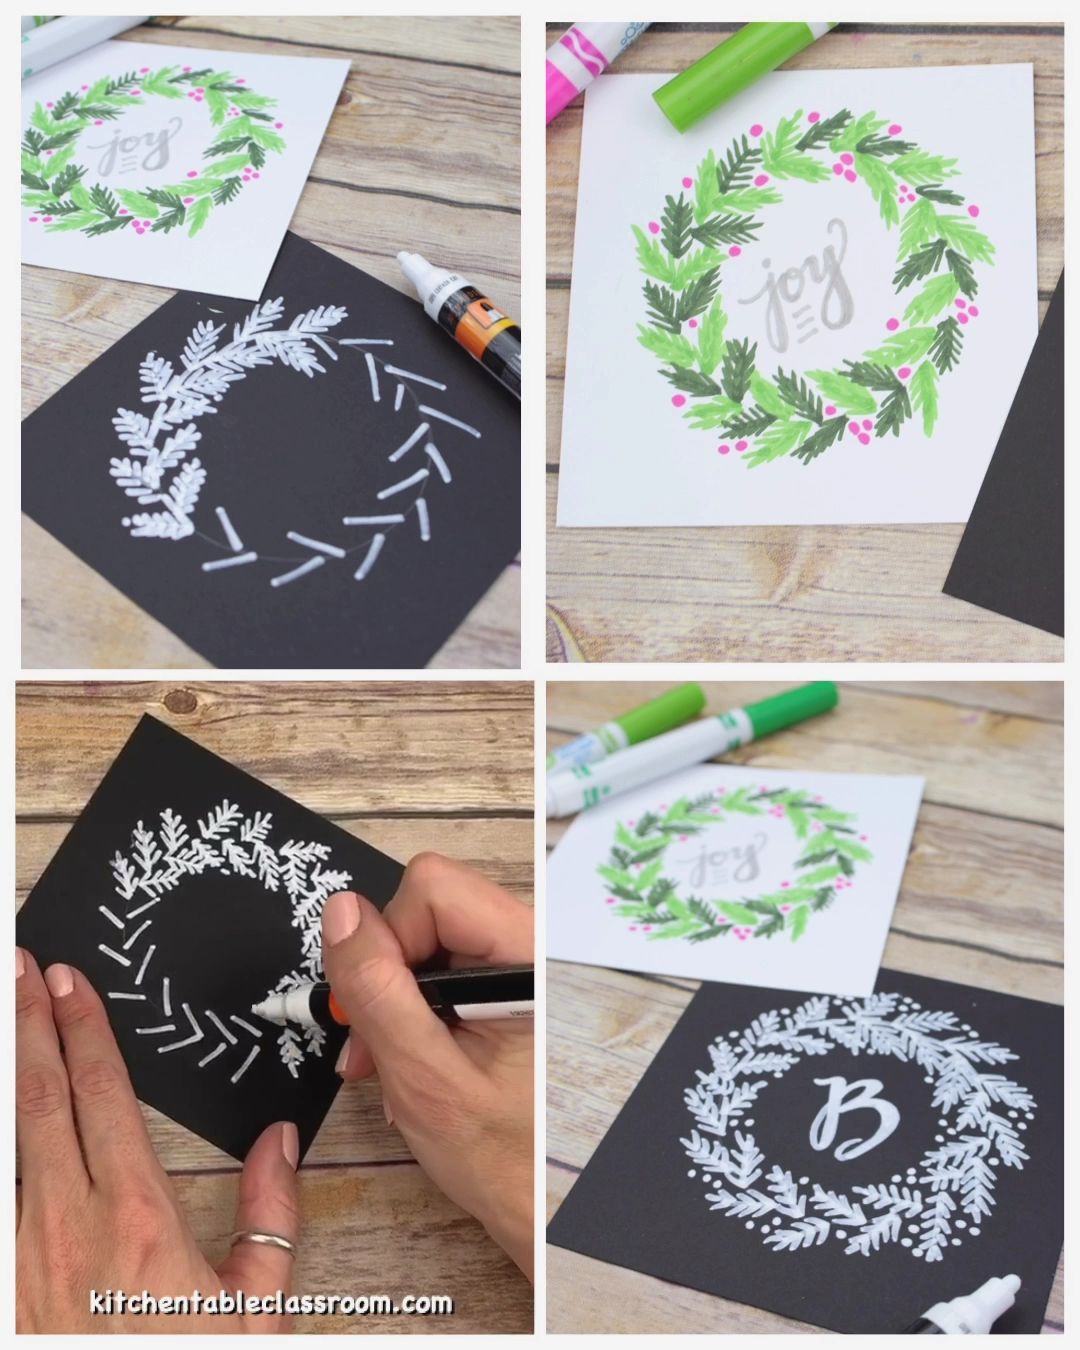 How to Draw A Holiday Wreath- Wreath Drawing Tutorial - The Kitchen Table Classroom -   17 holiday Christmas how to make ideas